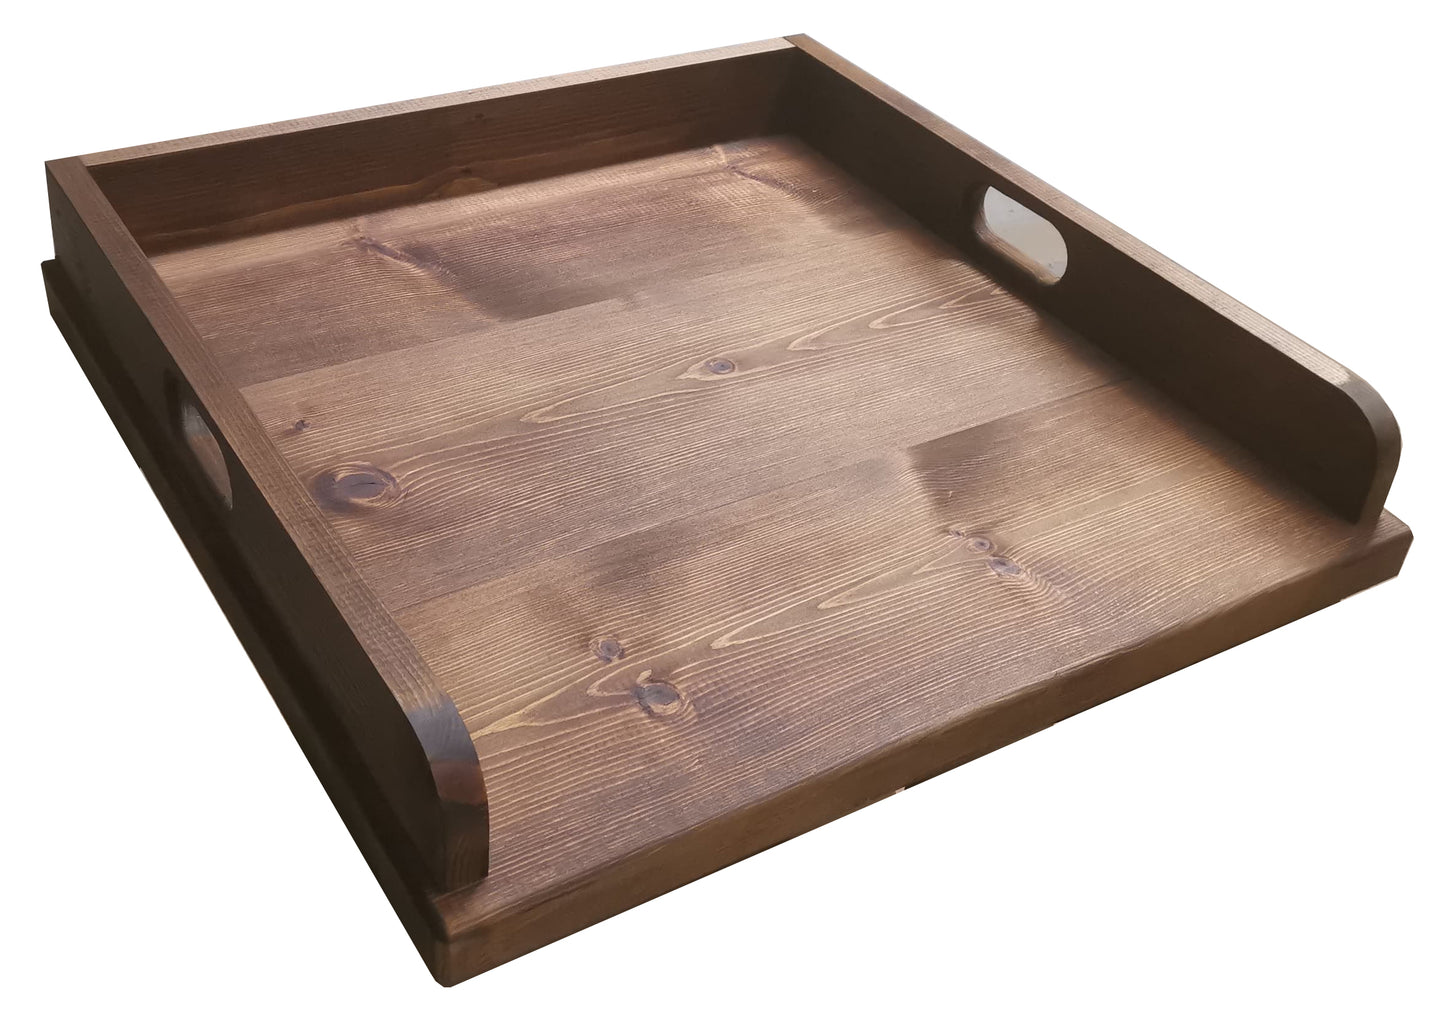 Cooker Cover, Sometimes Called Noodle Tray or Hob Cover. This are Made of Solid Wood and give Some Storage Space for Your Kitchen